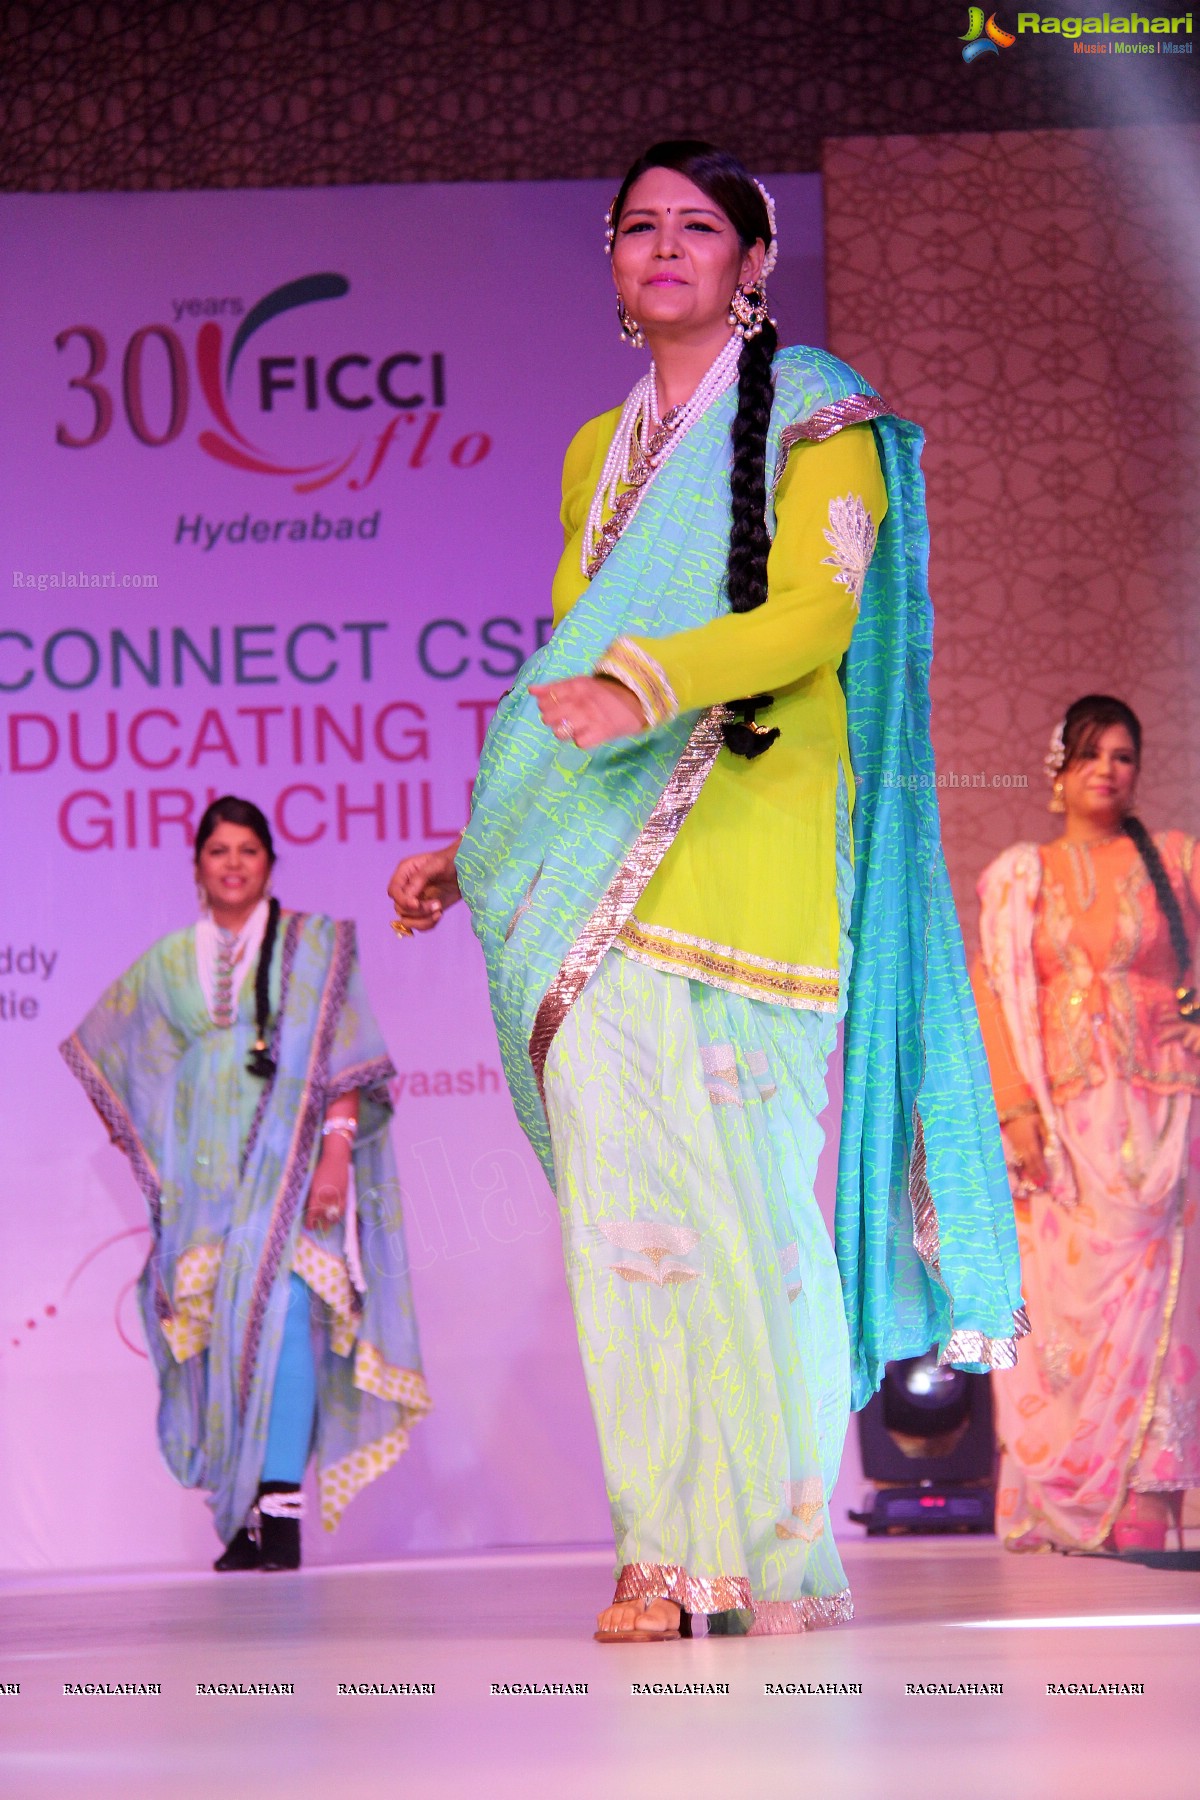 FLO Walks to Educate the Girl Child